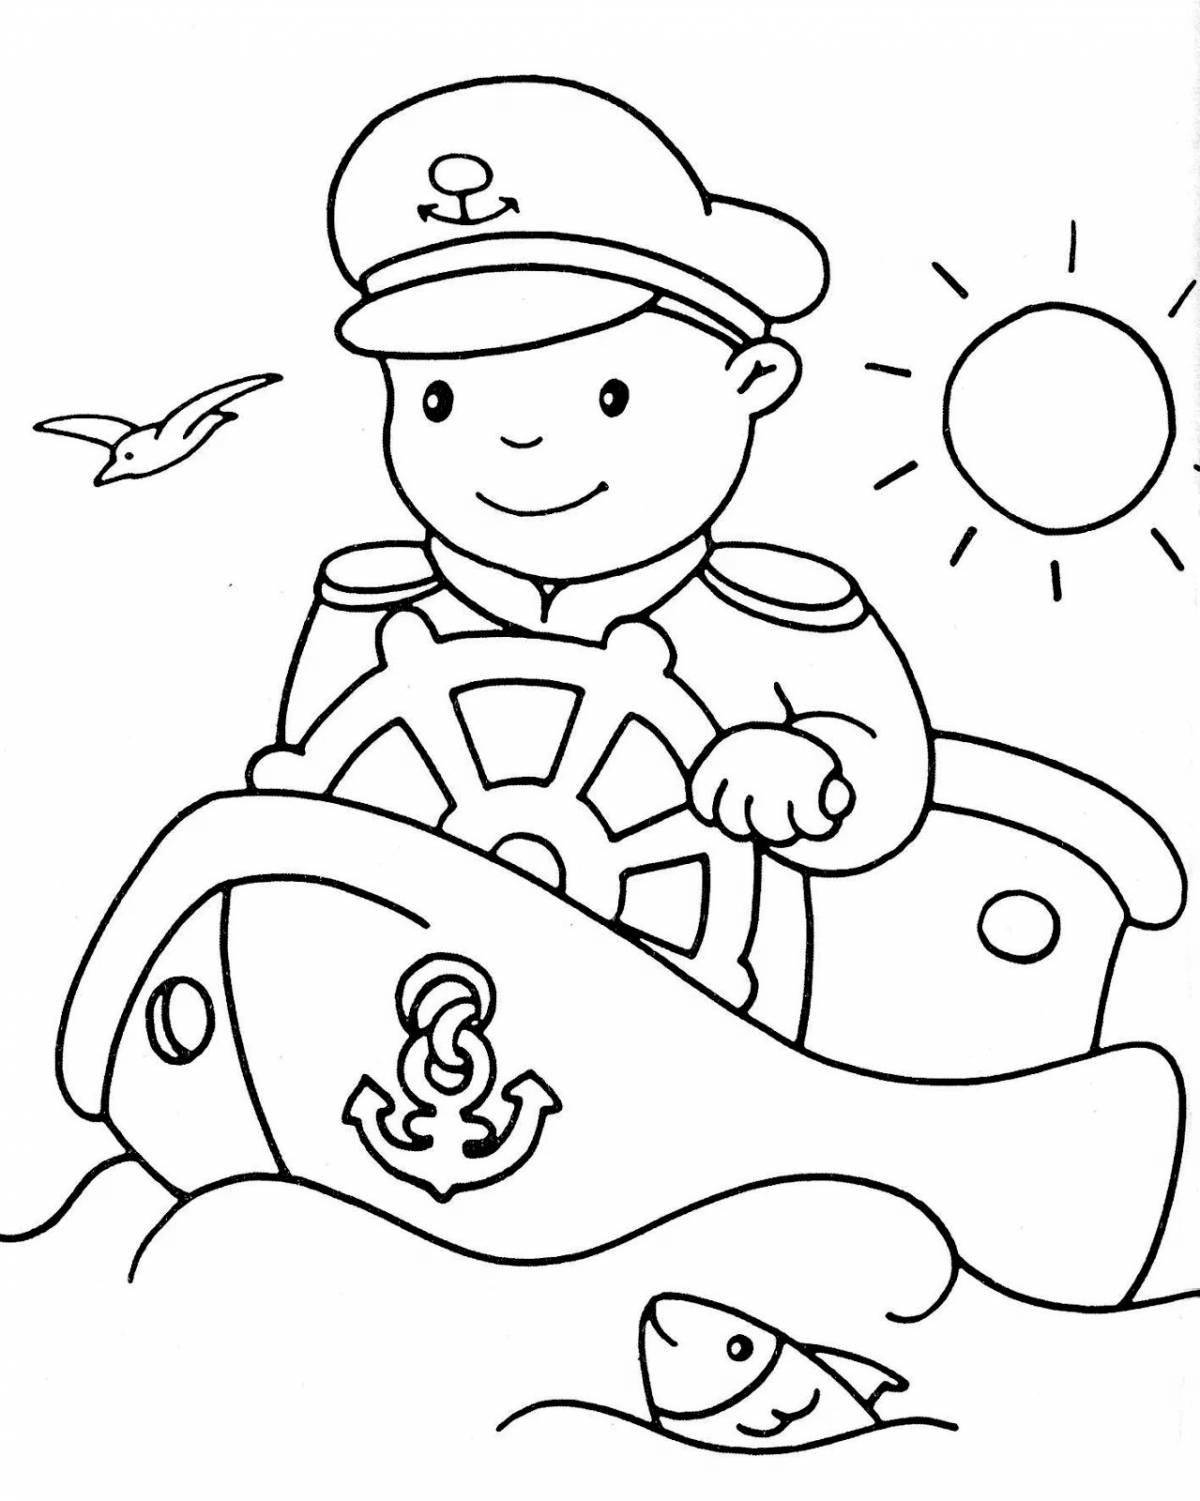 Animated soldier coloring page for kids